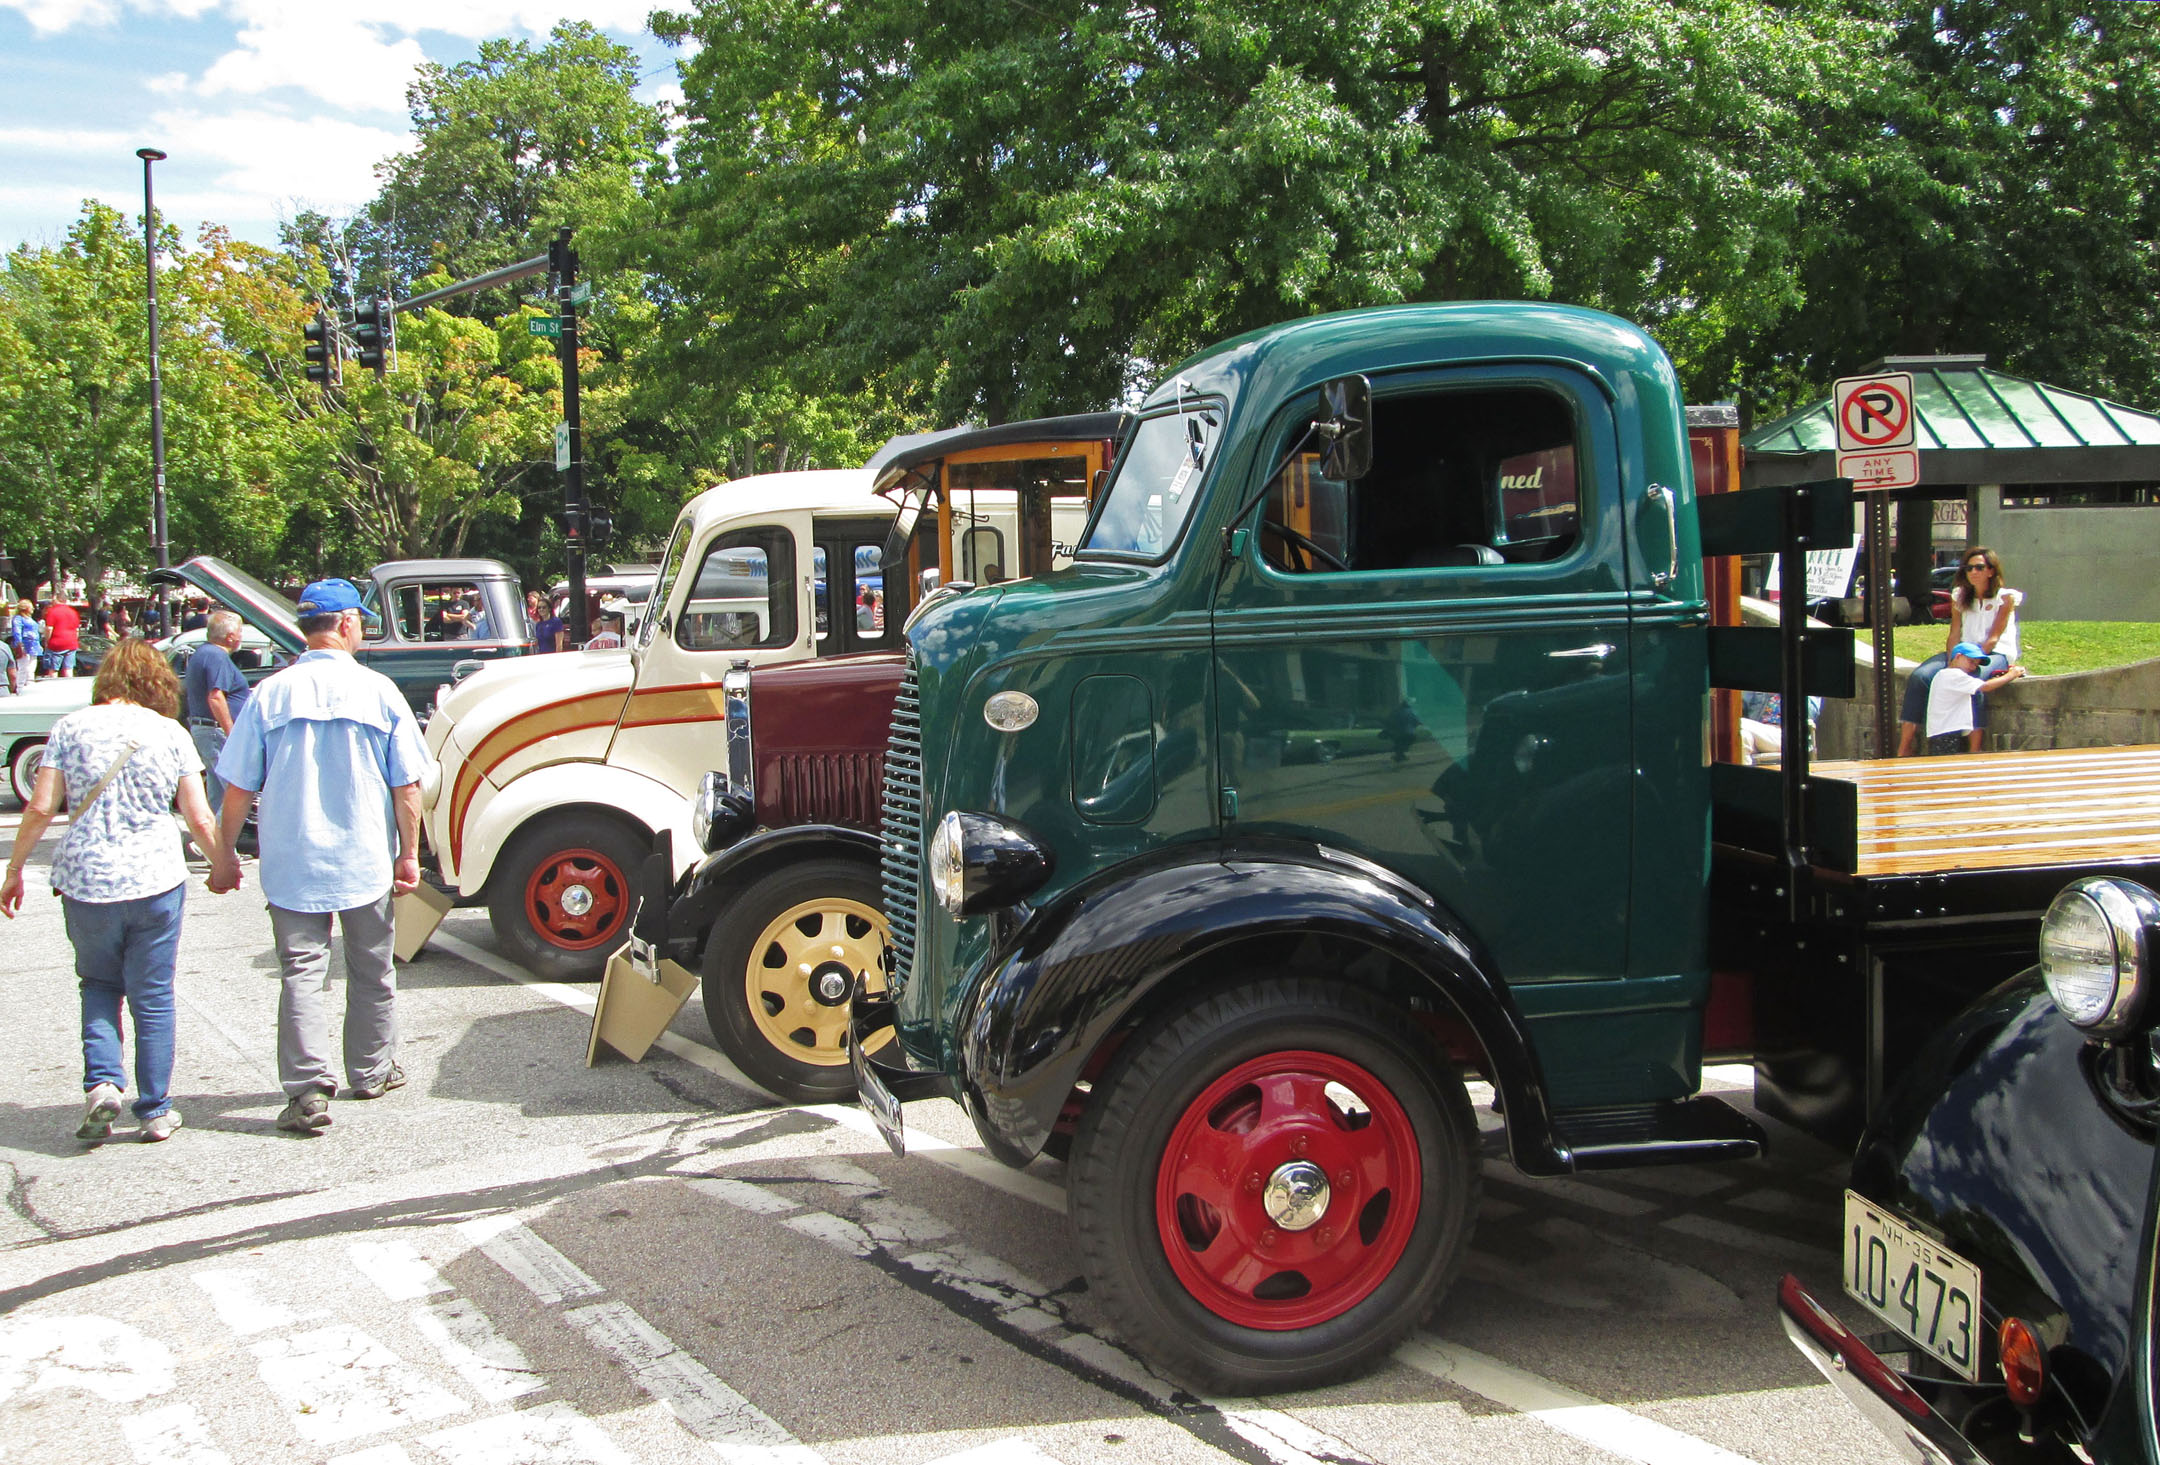 89 Top Antique car show manchester nh for Android Wallpaper